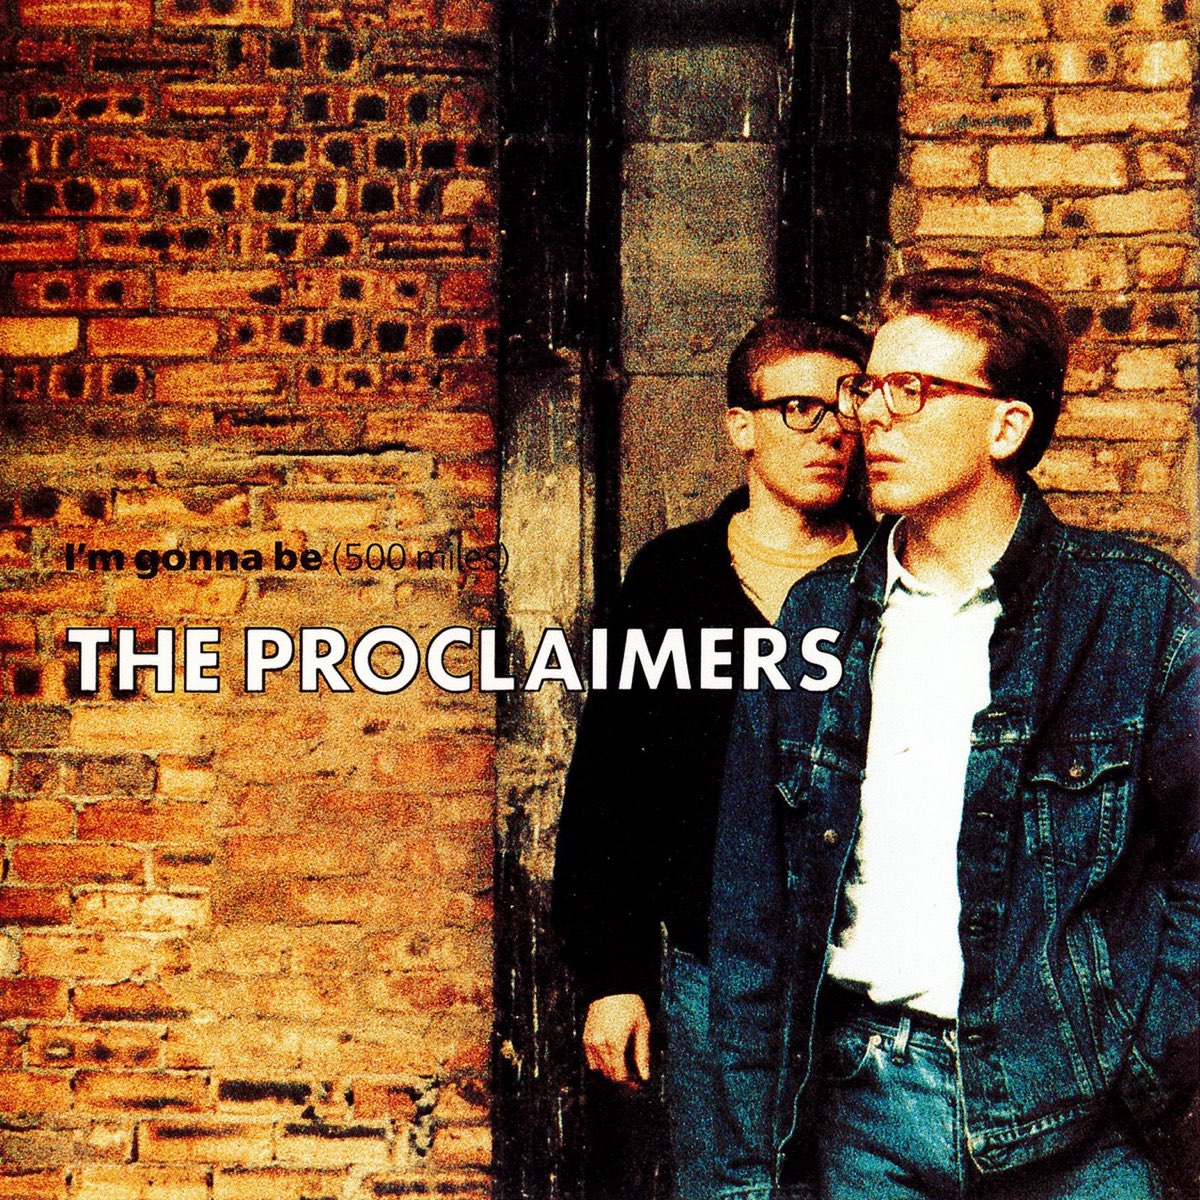 I'm Gonna Be (500 Miles) - Single by The Proclaimers on Apple Music